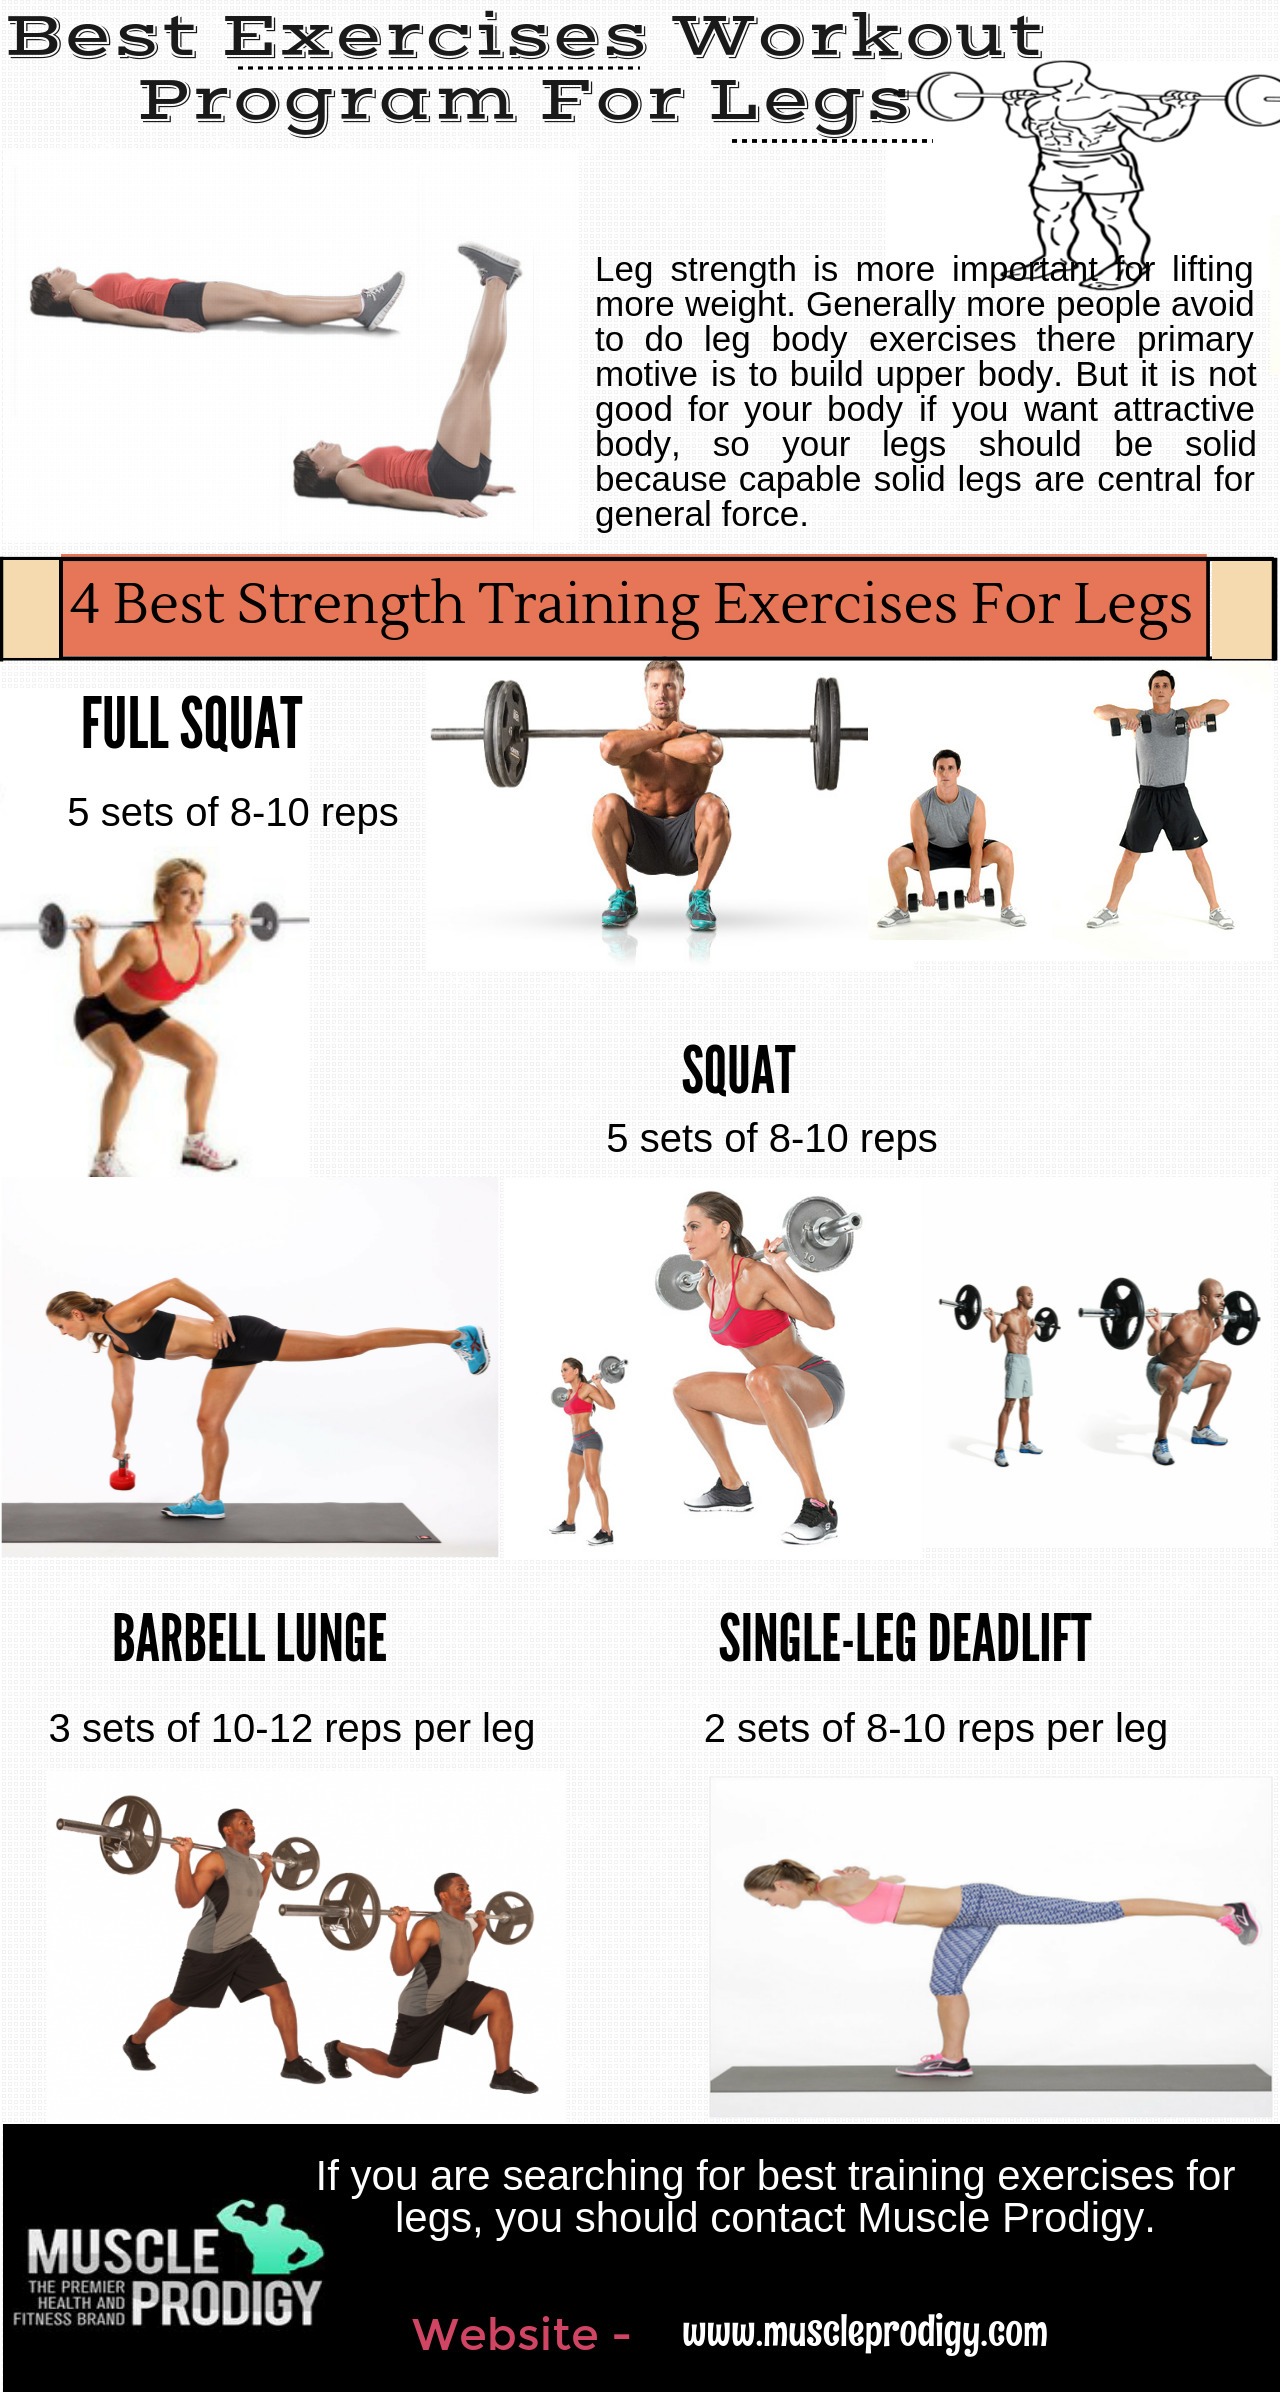 Best Weight Training Exercises For Legs | Visual.ly